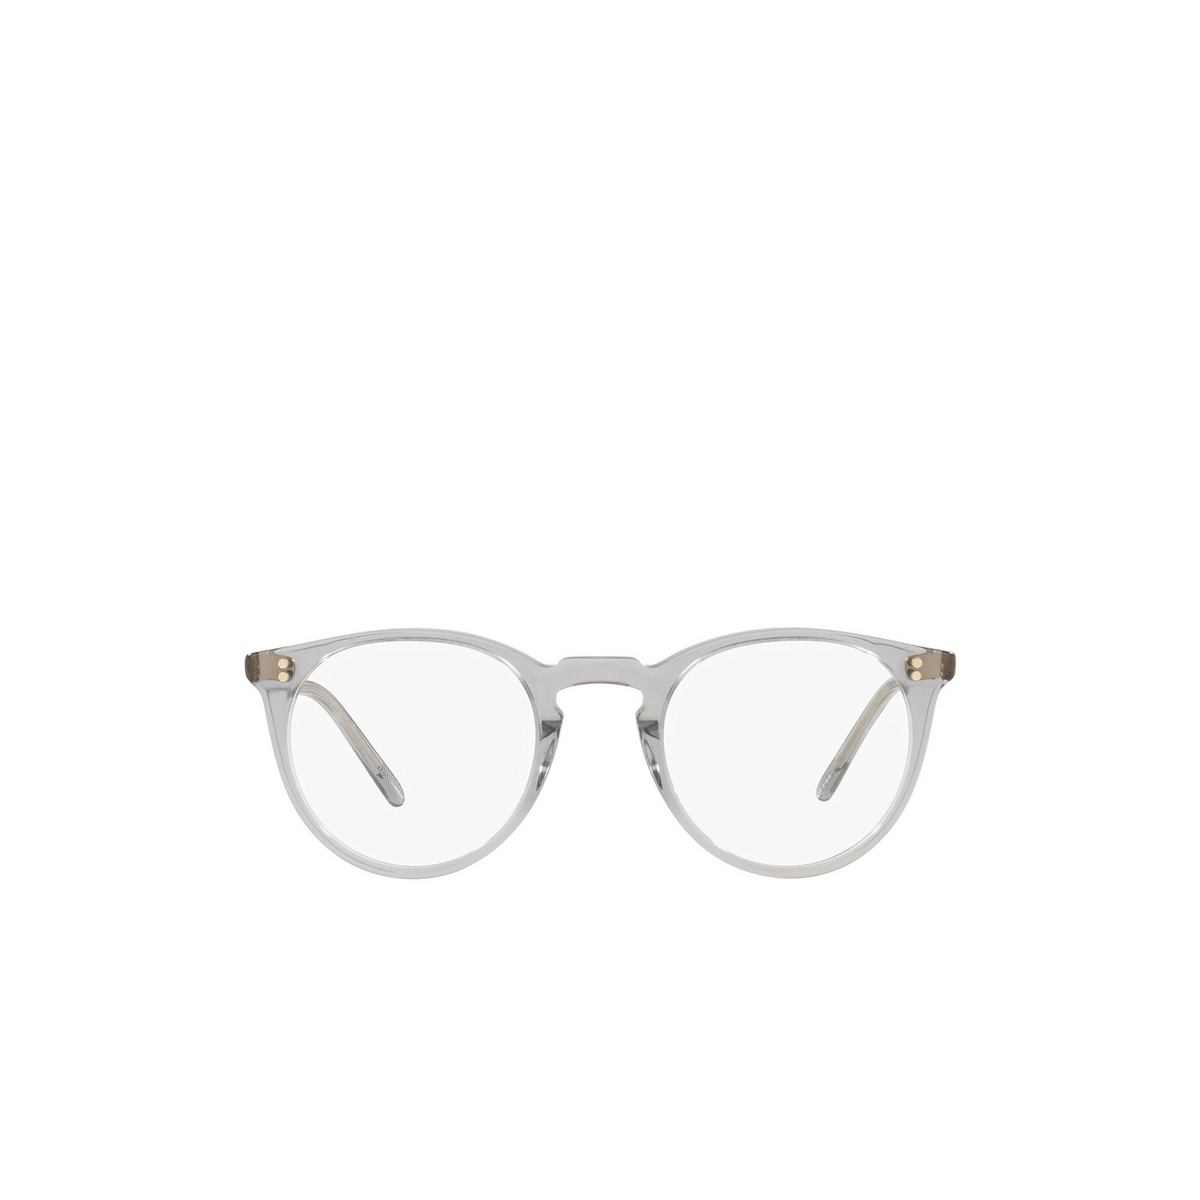 Oliver Peoples O'MALLEY Eyeglasses 1132 Workman Grey - front view